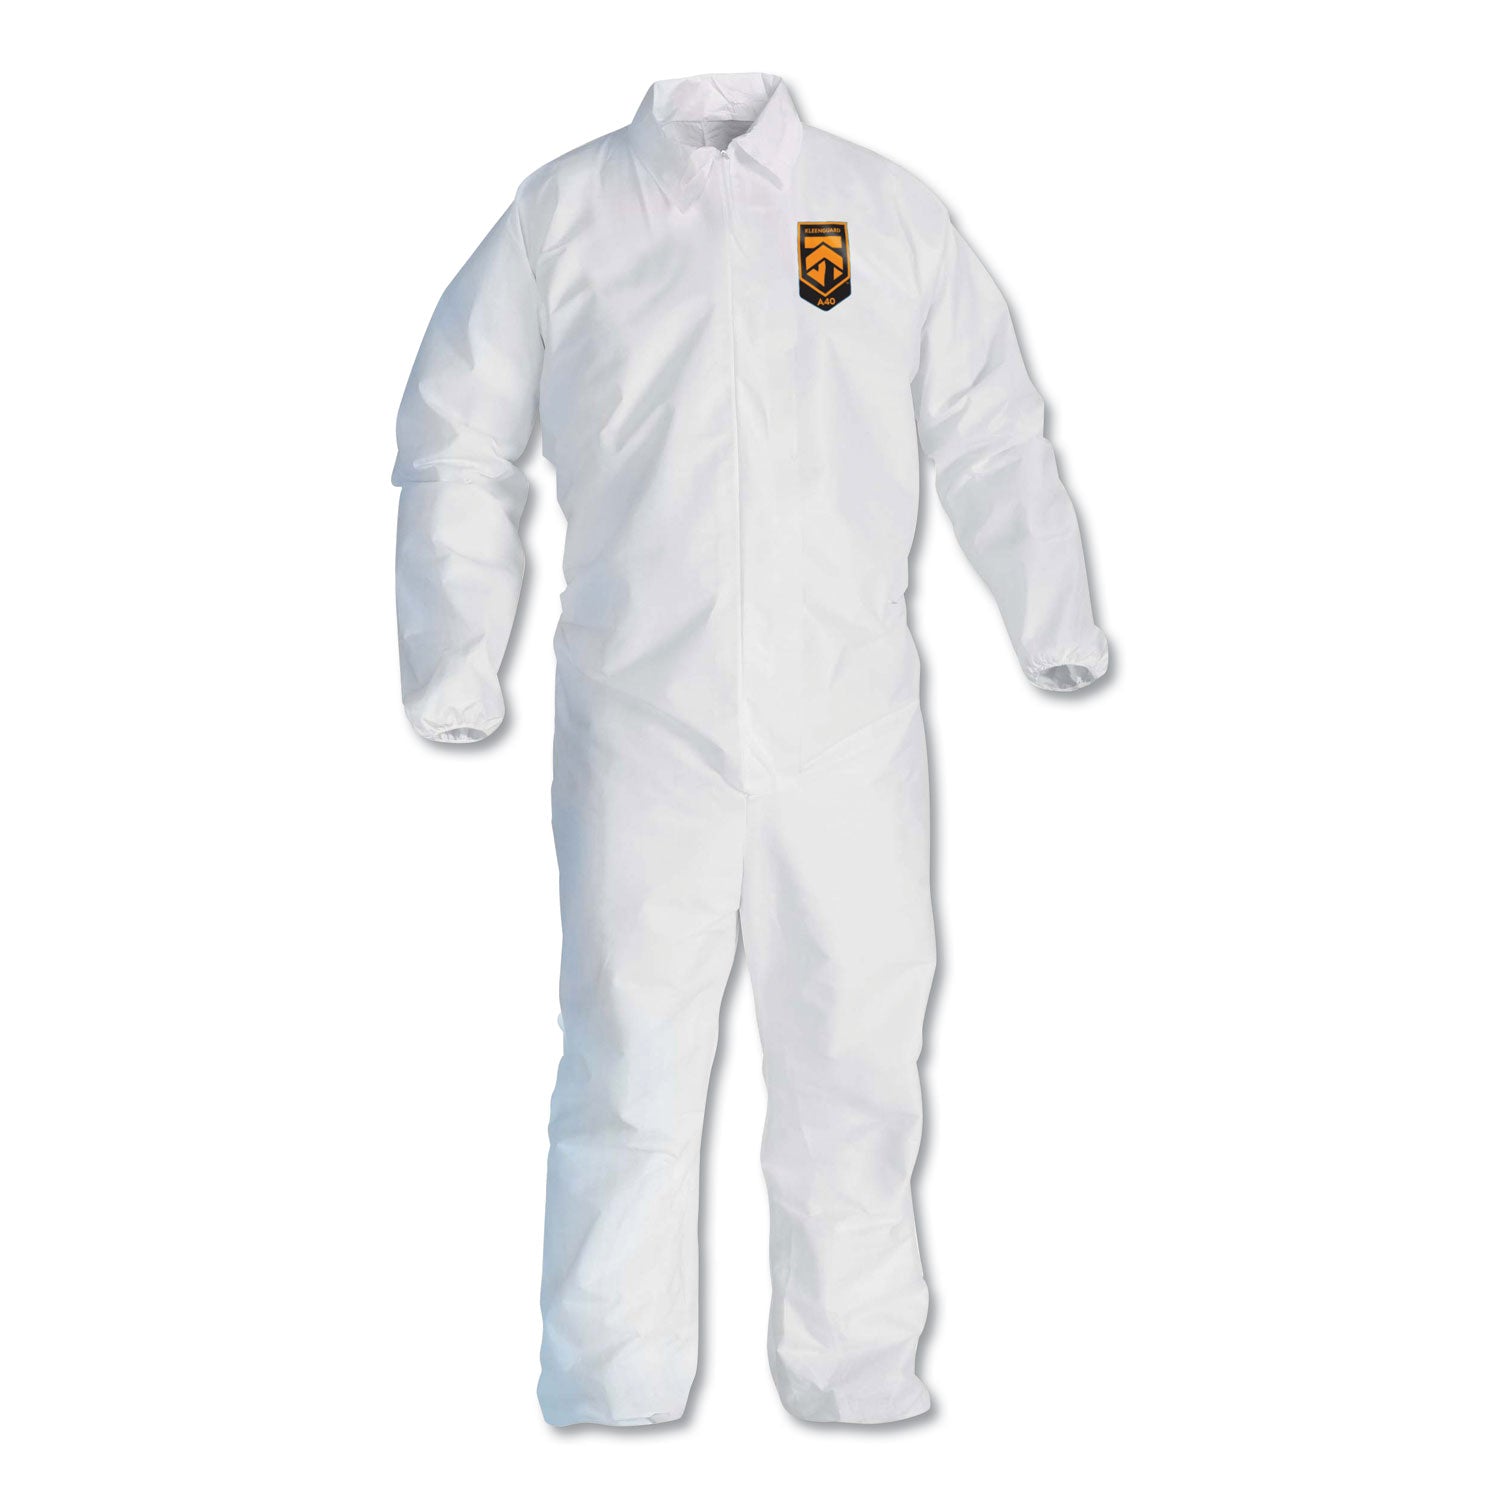 a40-elastic-cuff-and-ankles-coveralls-3x-large-white-25-carton_kcc44316 - 1